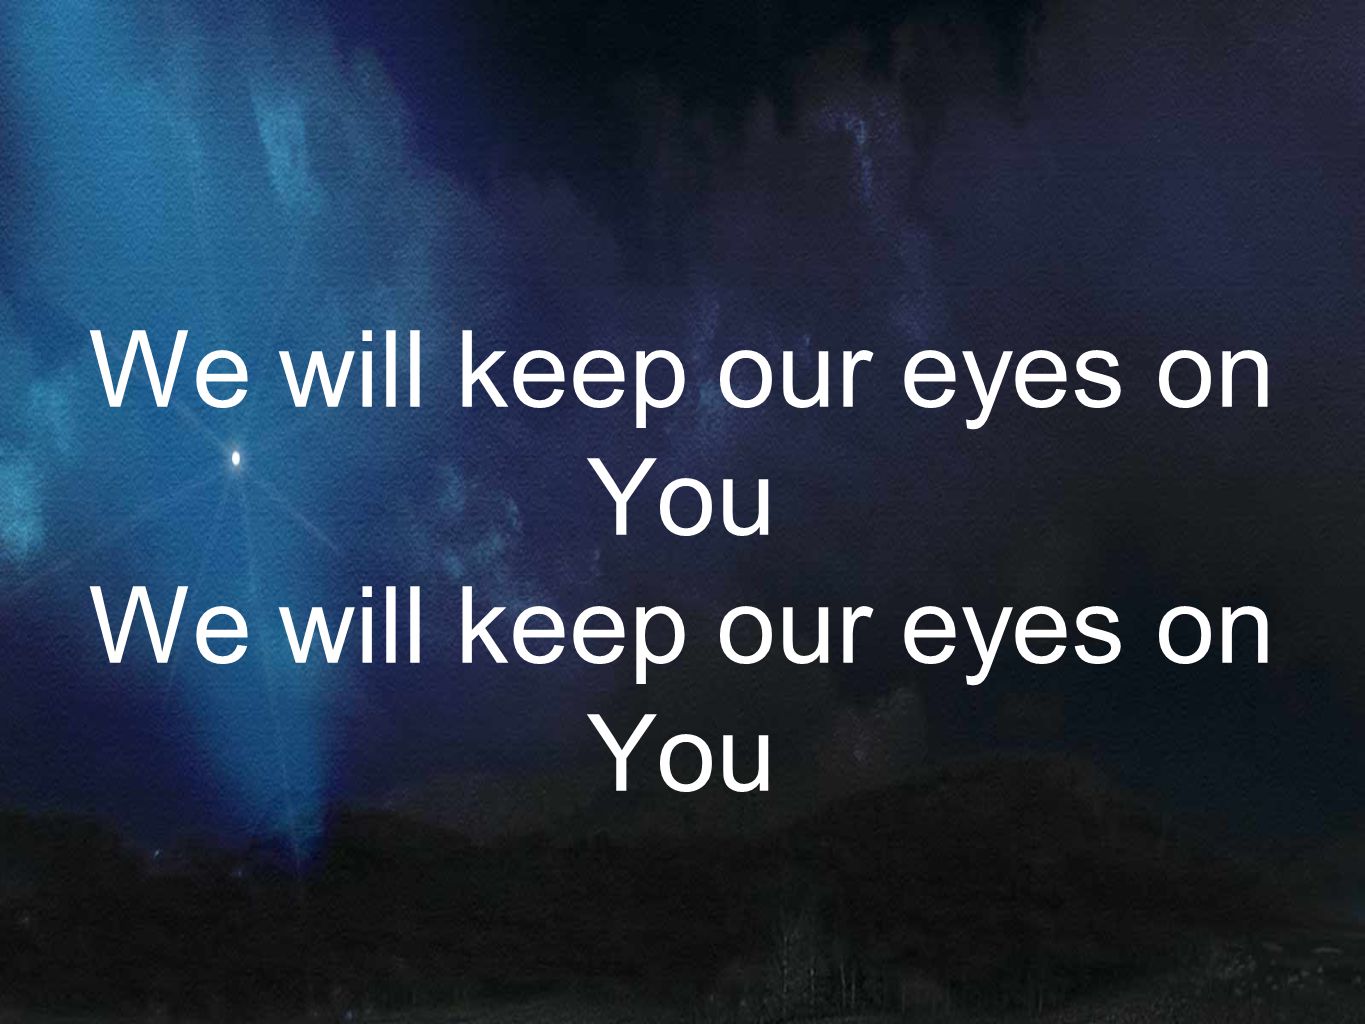 We will keep our eyes on You